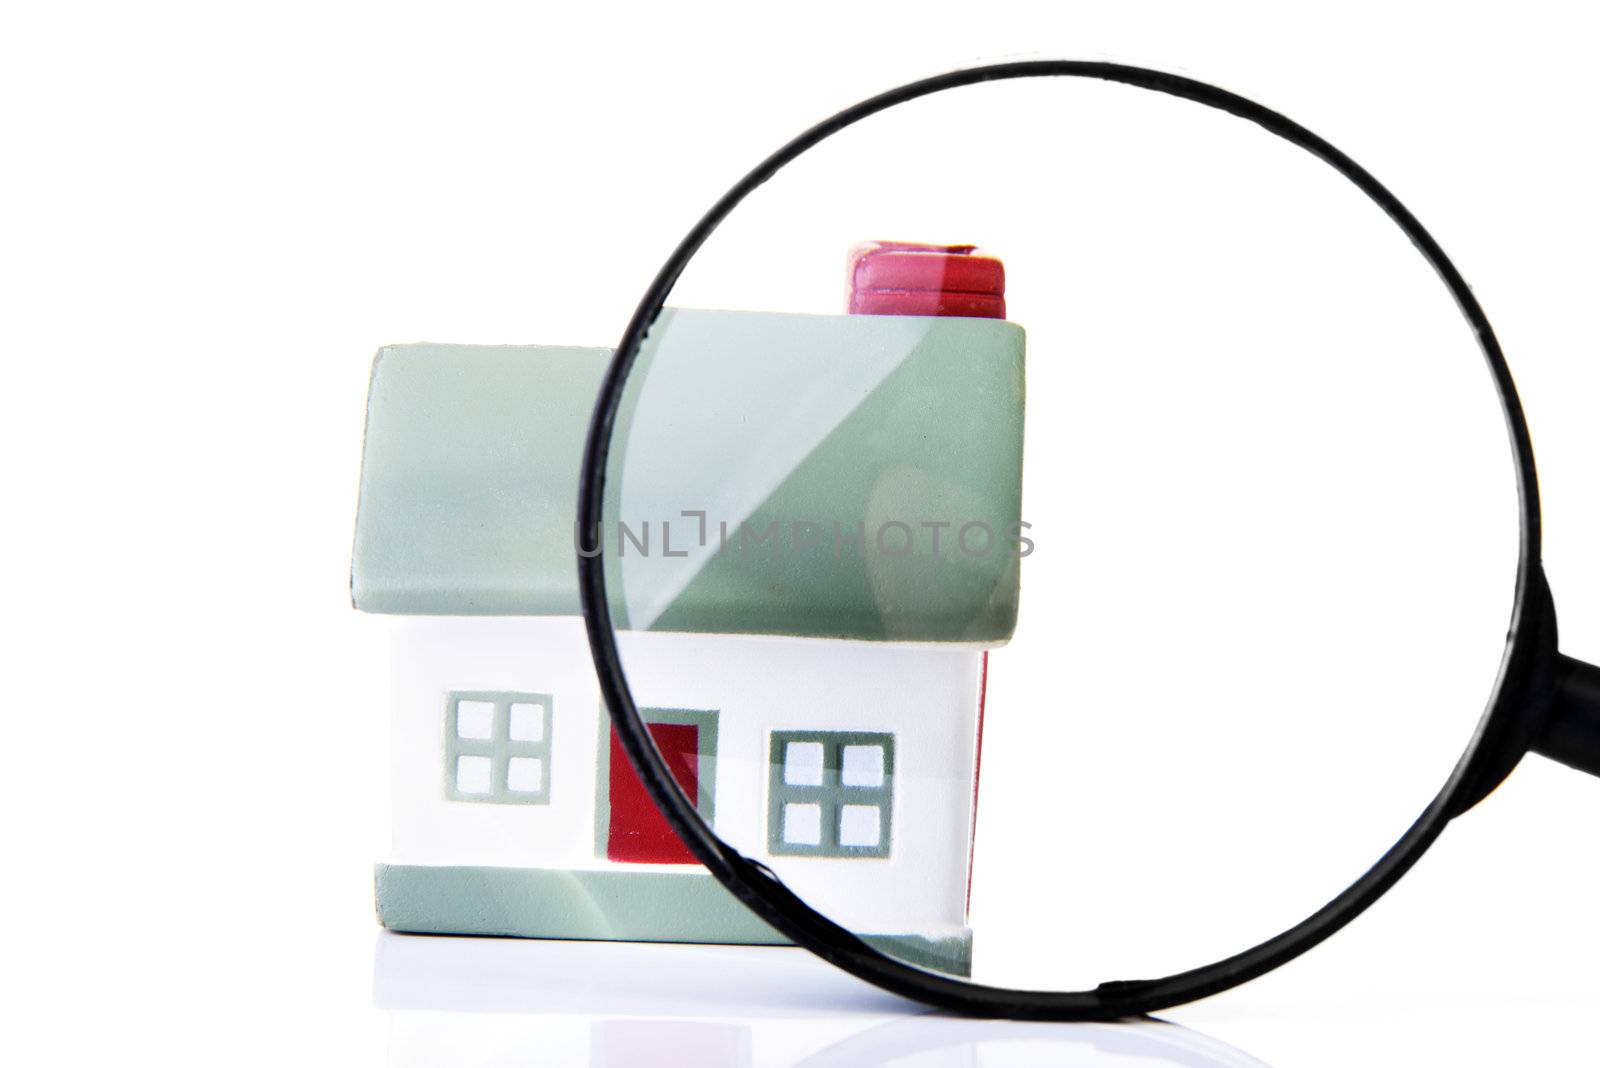 Magnifying glass inspecting a model single home building structure. Isolated on white. Real estate search concept.